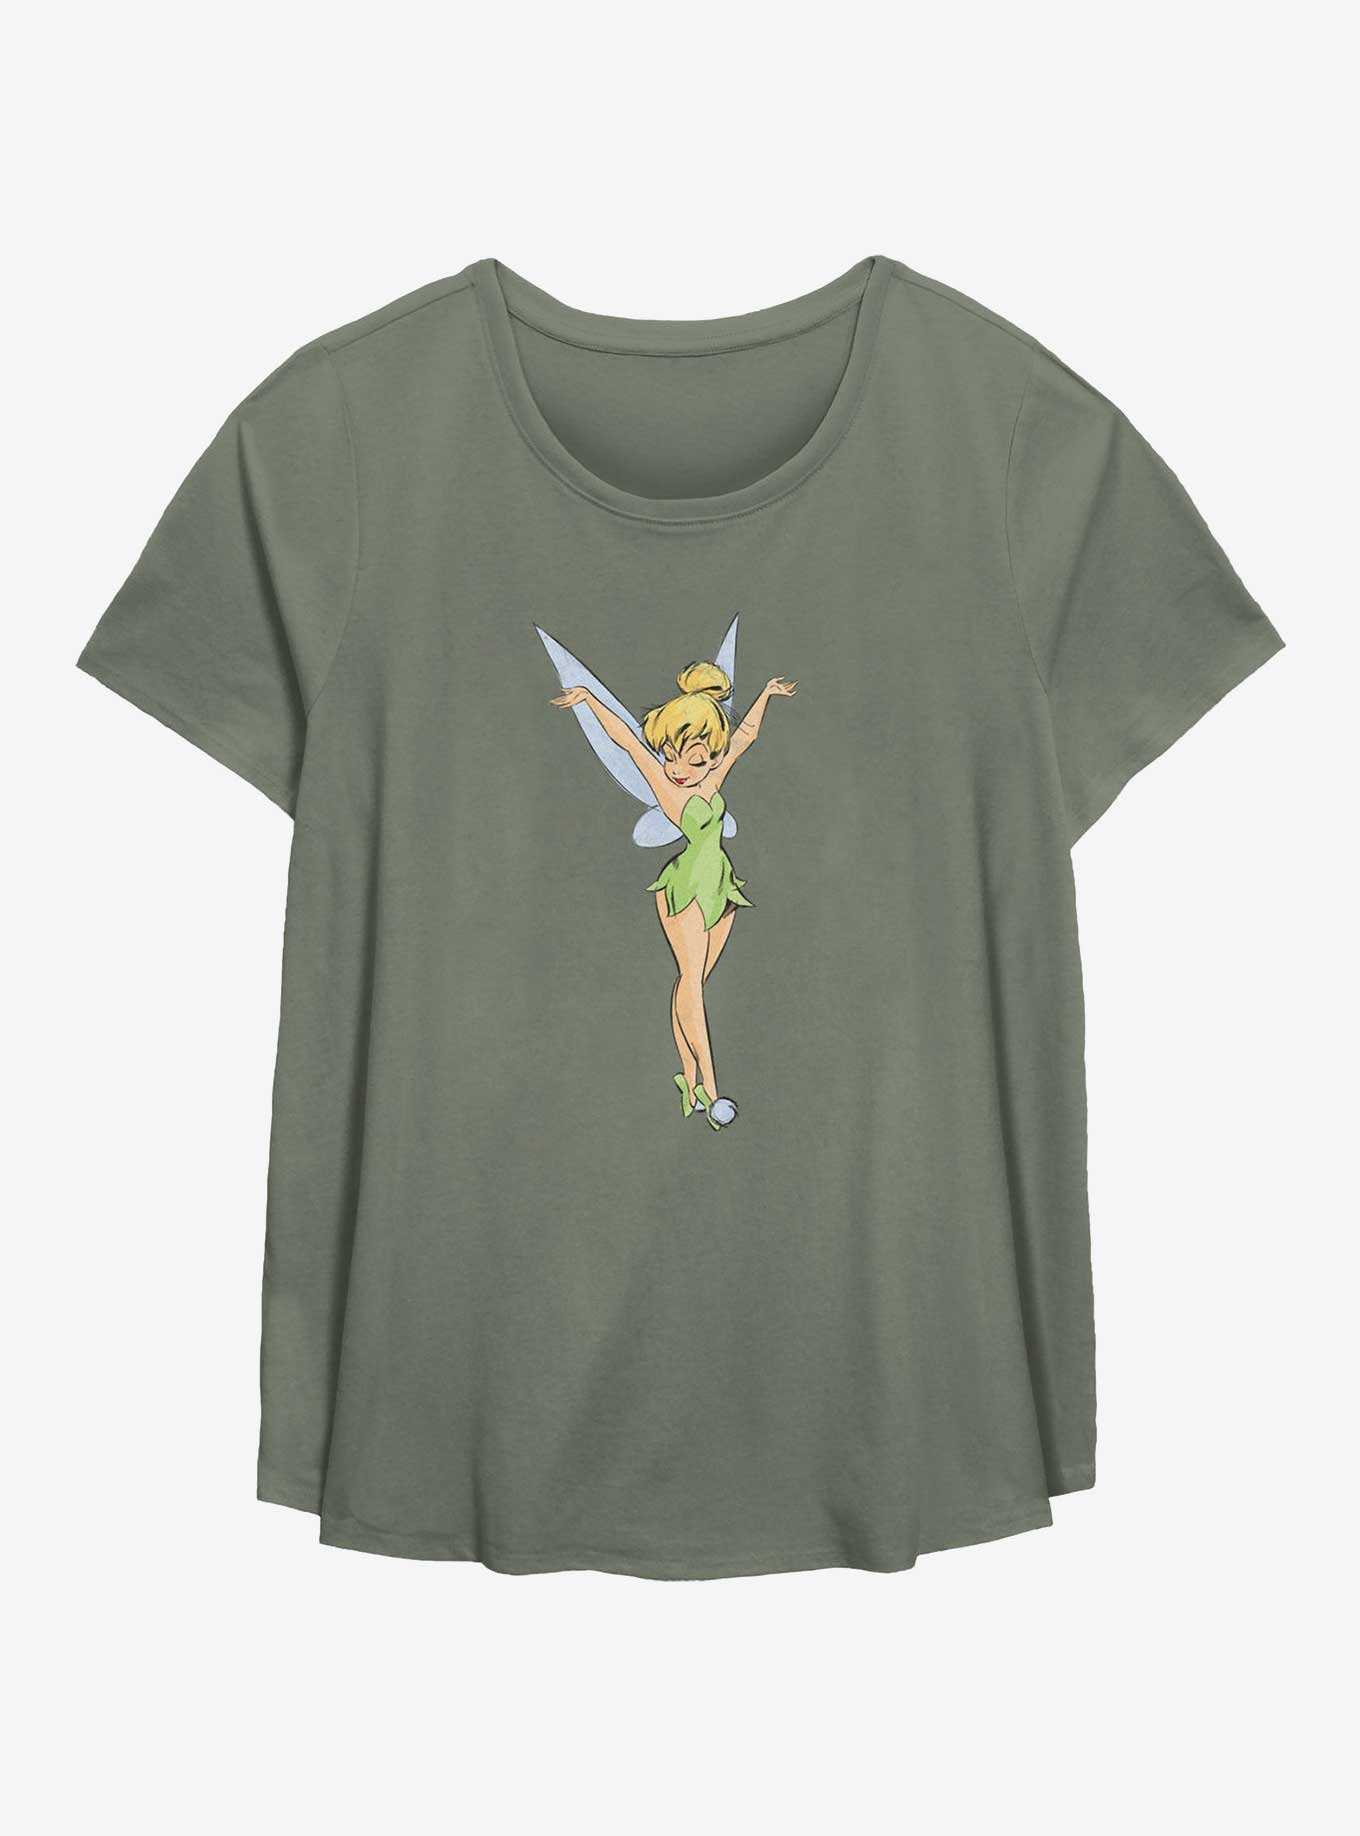 OFFICIAL Peter Pan Merchandise, | Topic Shirts & Hot More